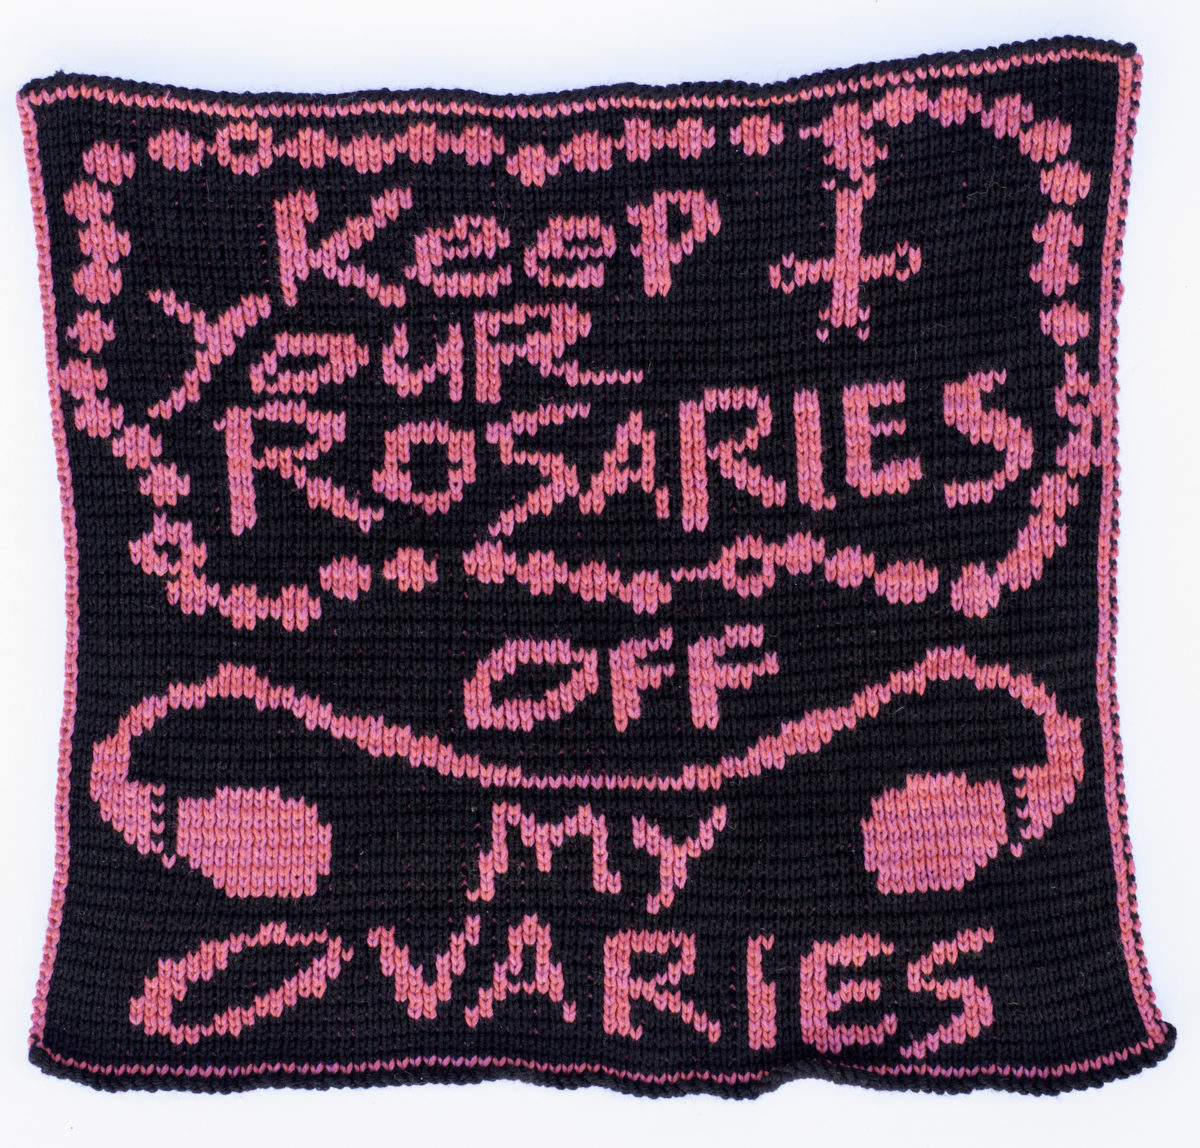 Lisa Anne Auerbach, Keep Your Rosaries Off My Ovaries, 2020. Courtesy of the artist and GAVLAK Los Angeles / Palm Beach.